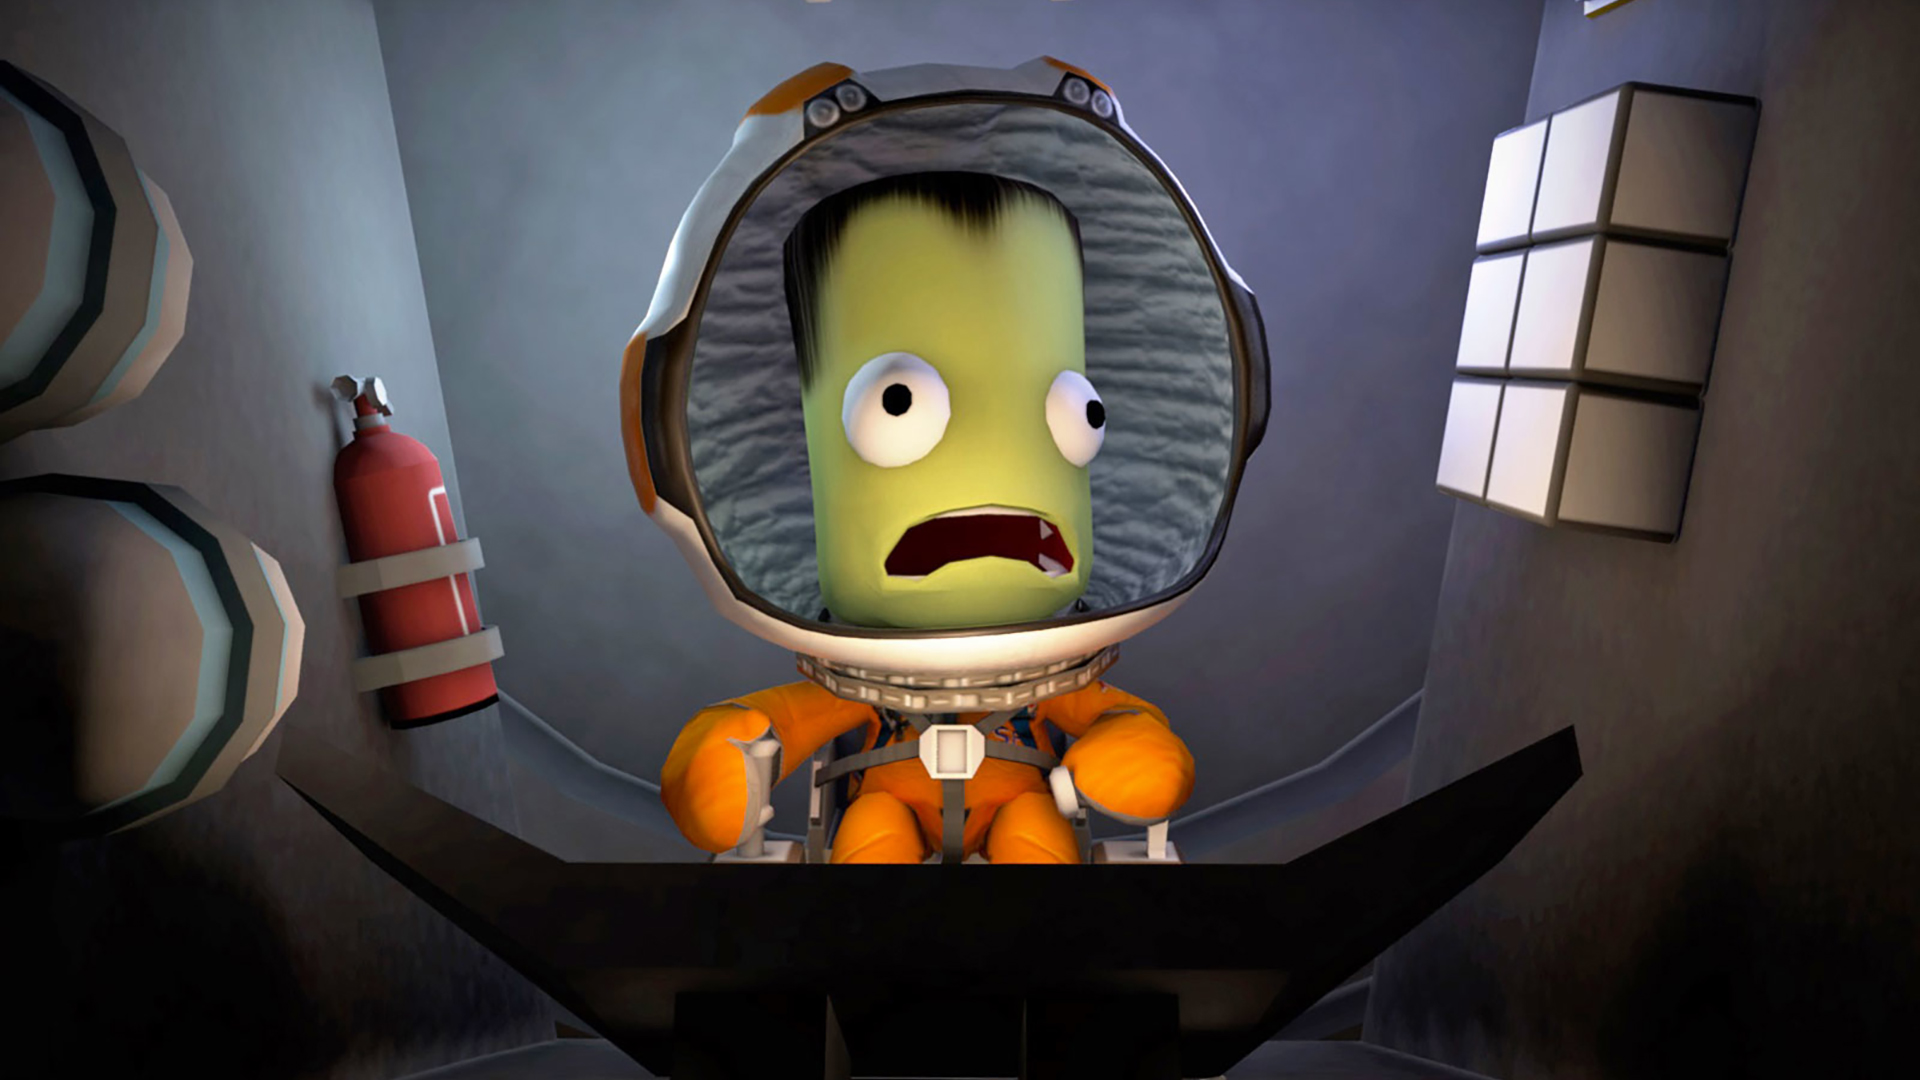  After a decade, Kerbal Space Program development is over 